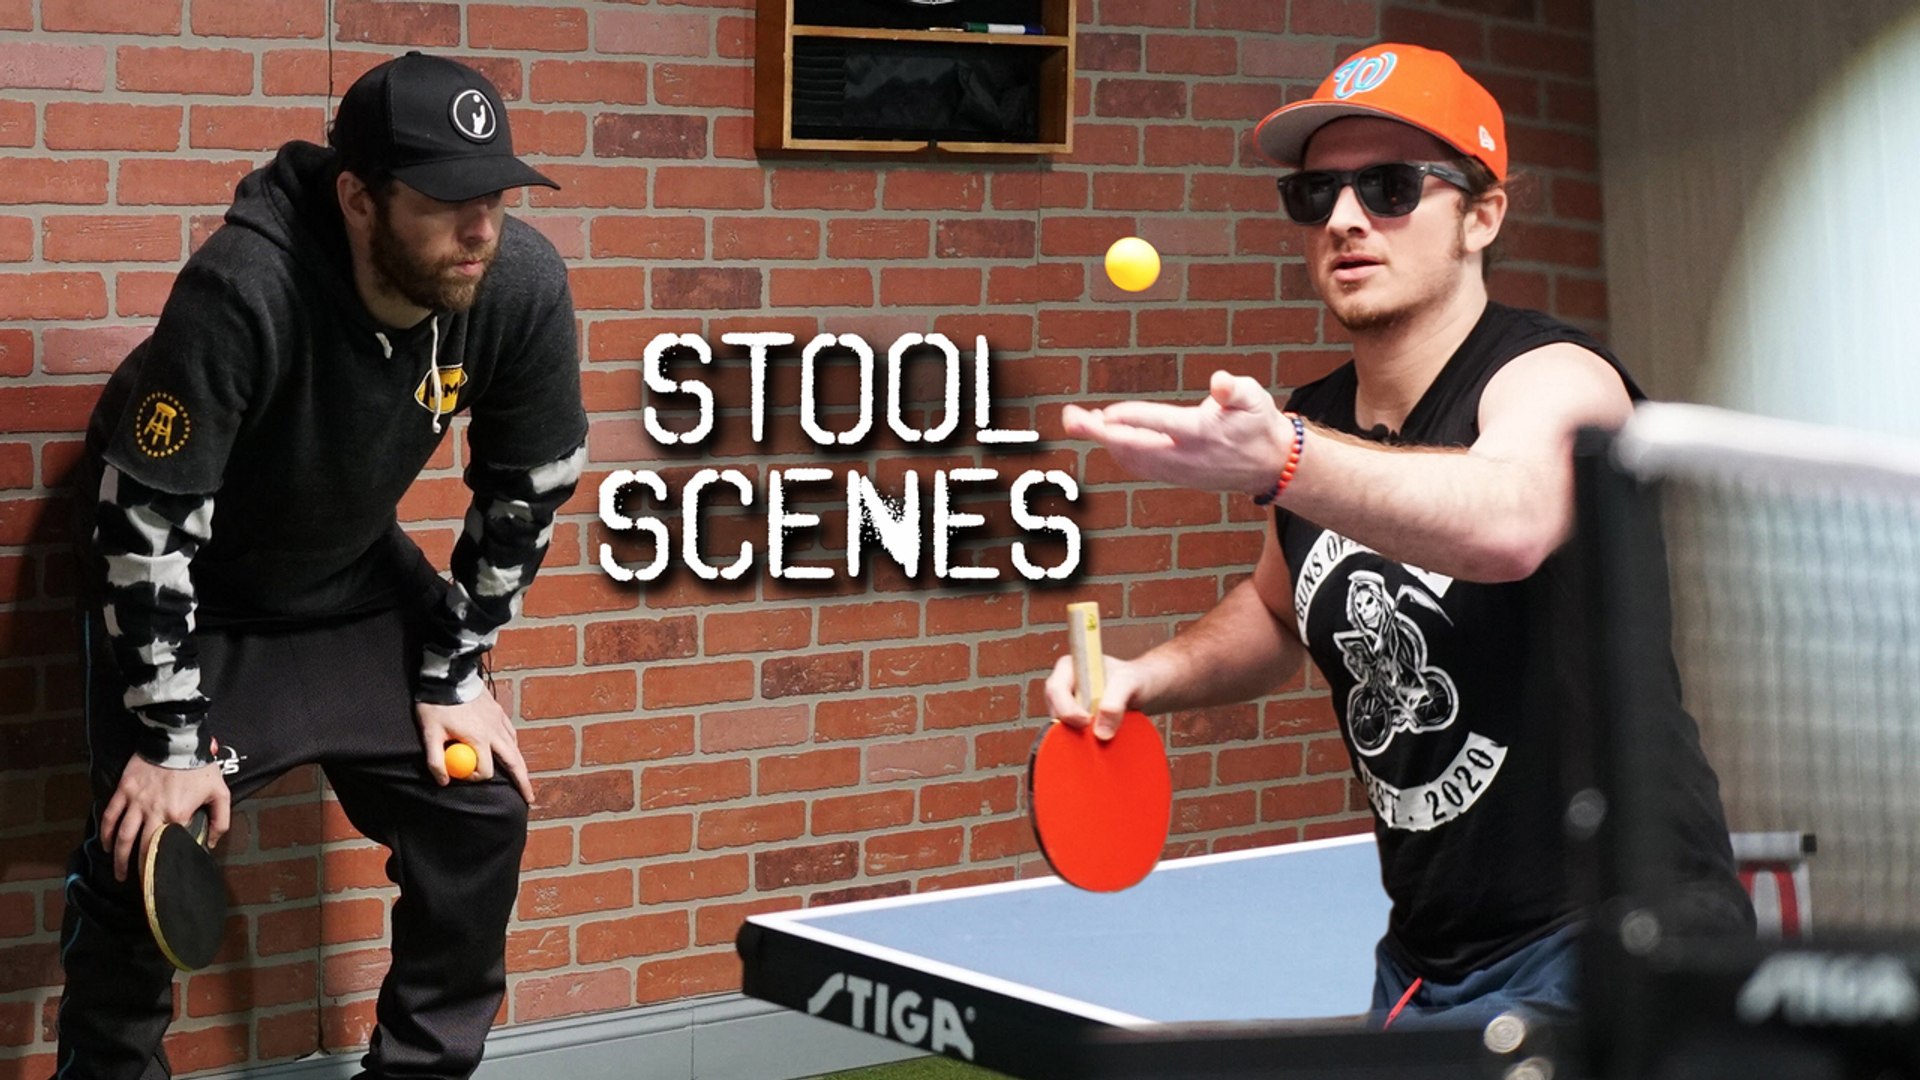 Stool Scenes 258 - Ping Pong, Hernias, and Travis The Chimpanzee